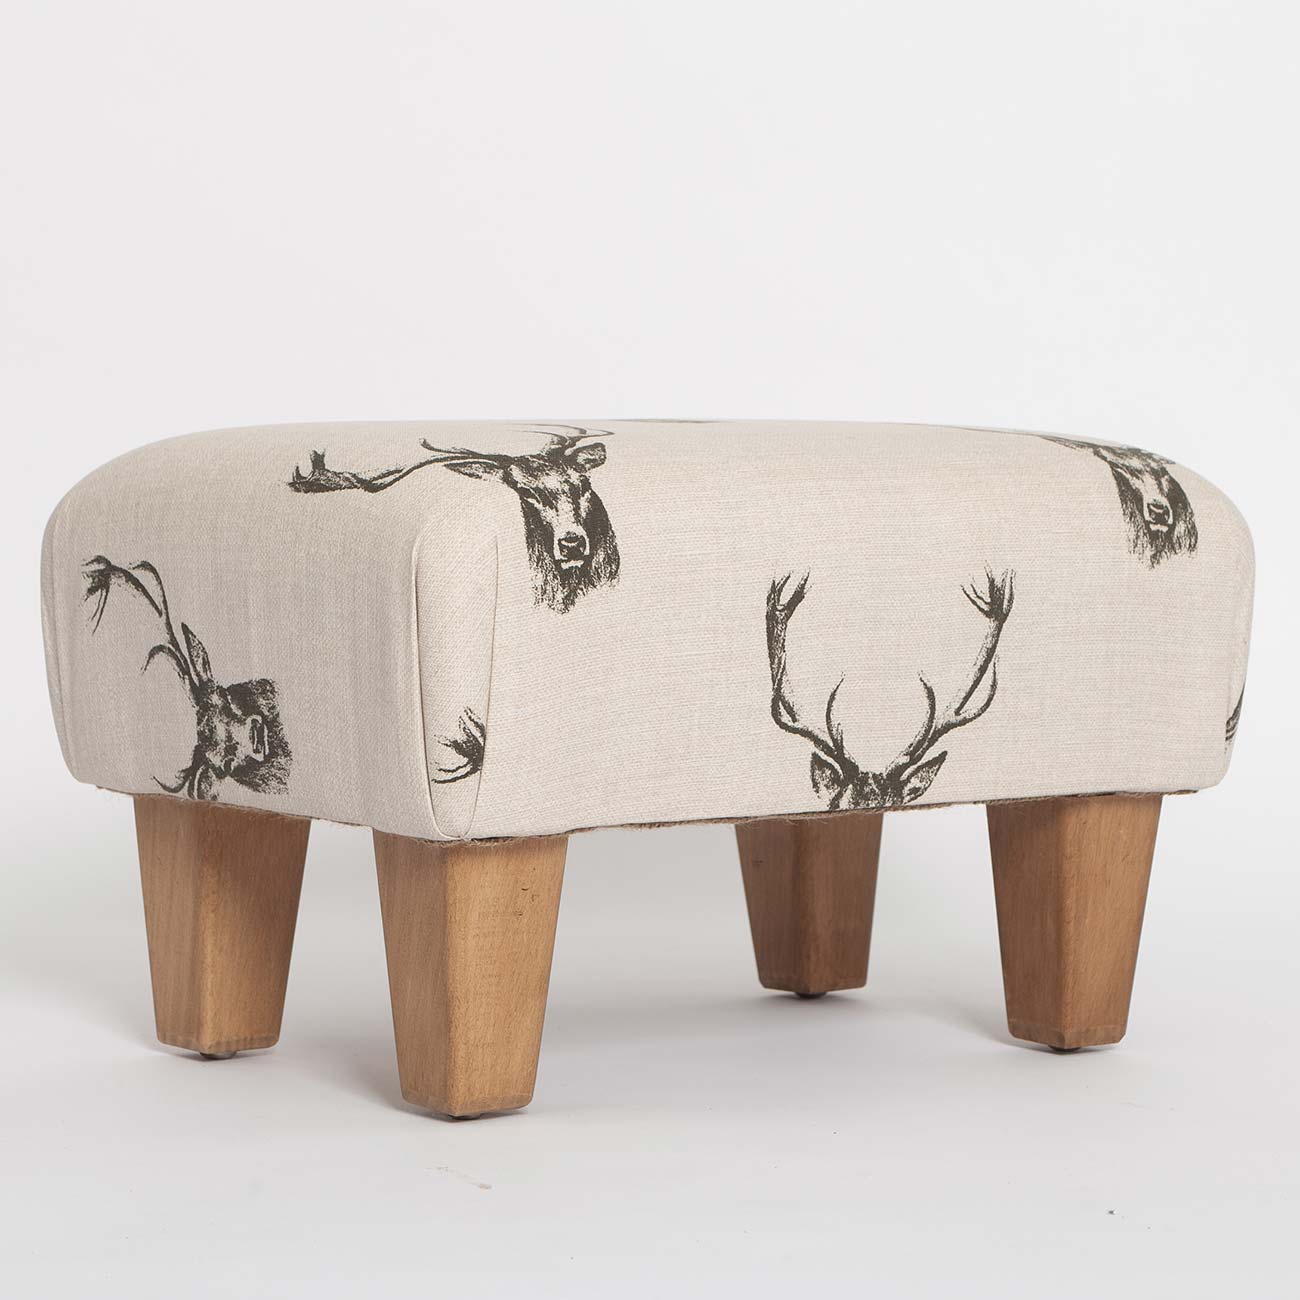 stag-head-footstool5 fabric from JLP